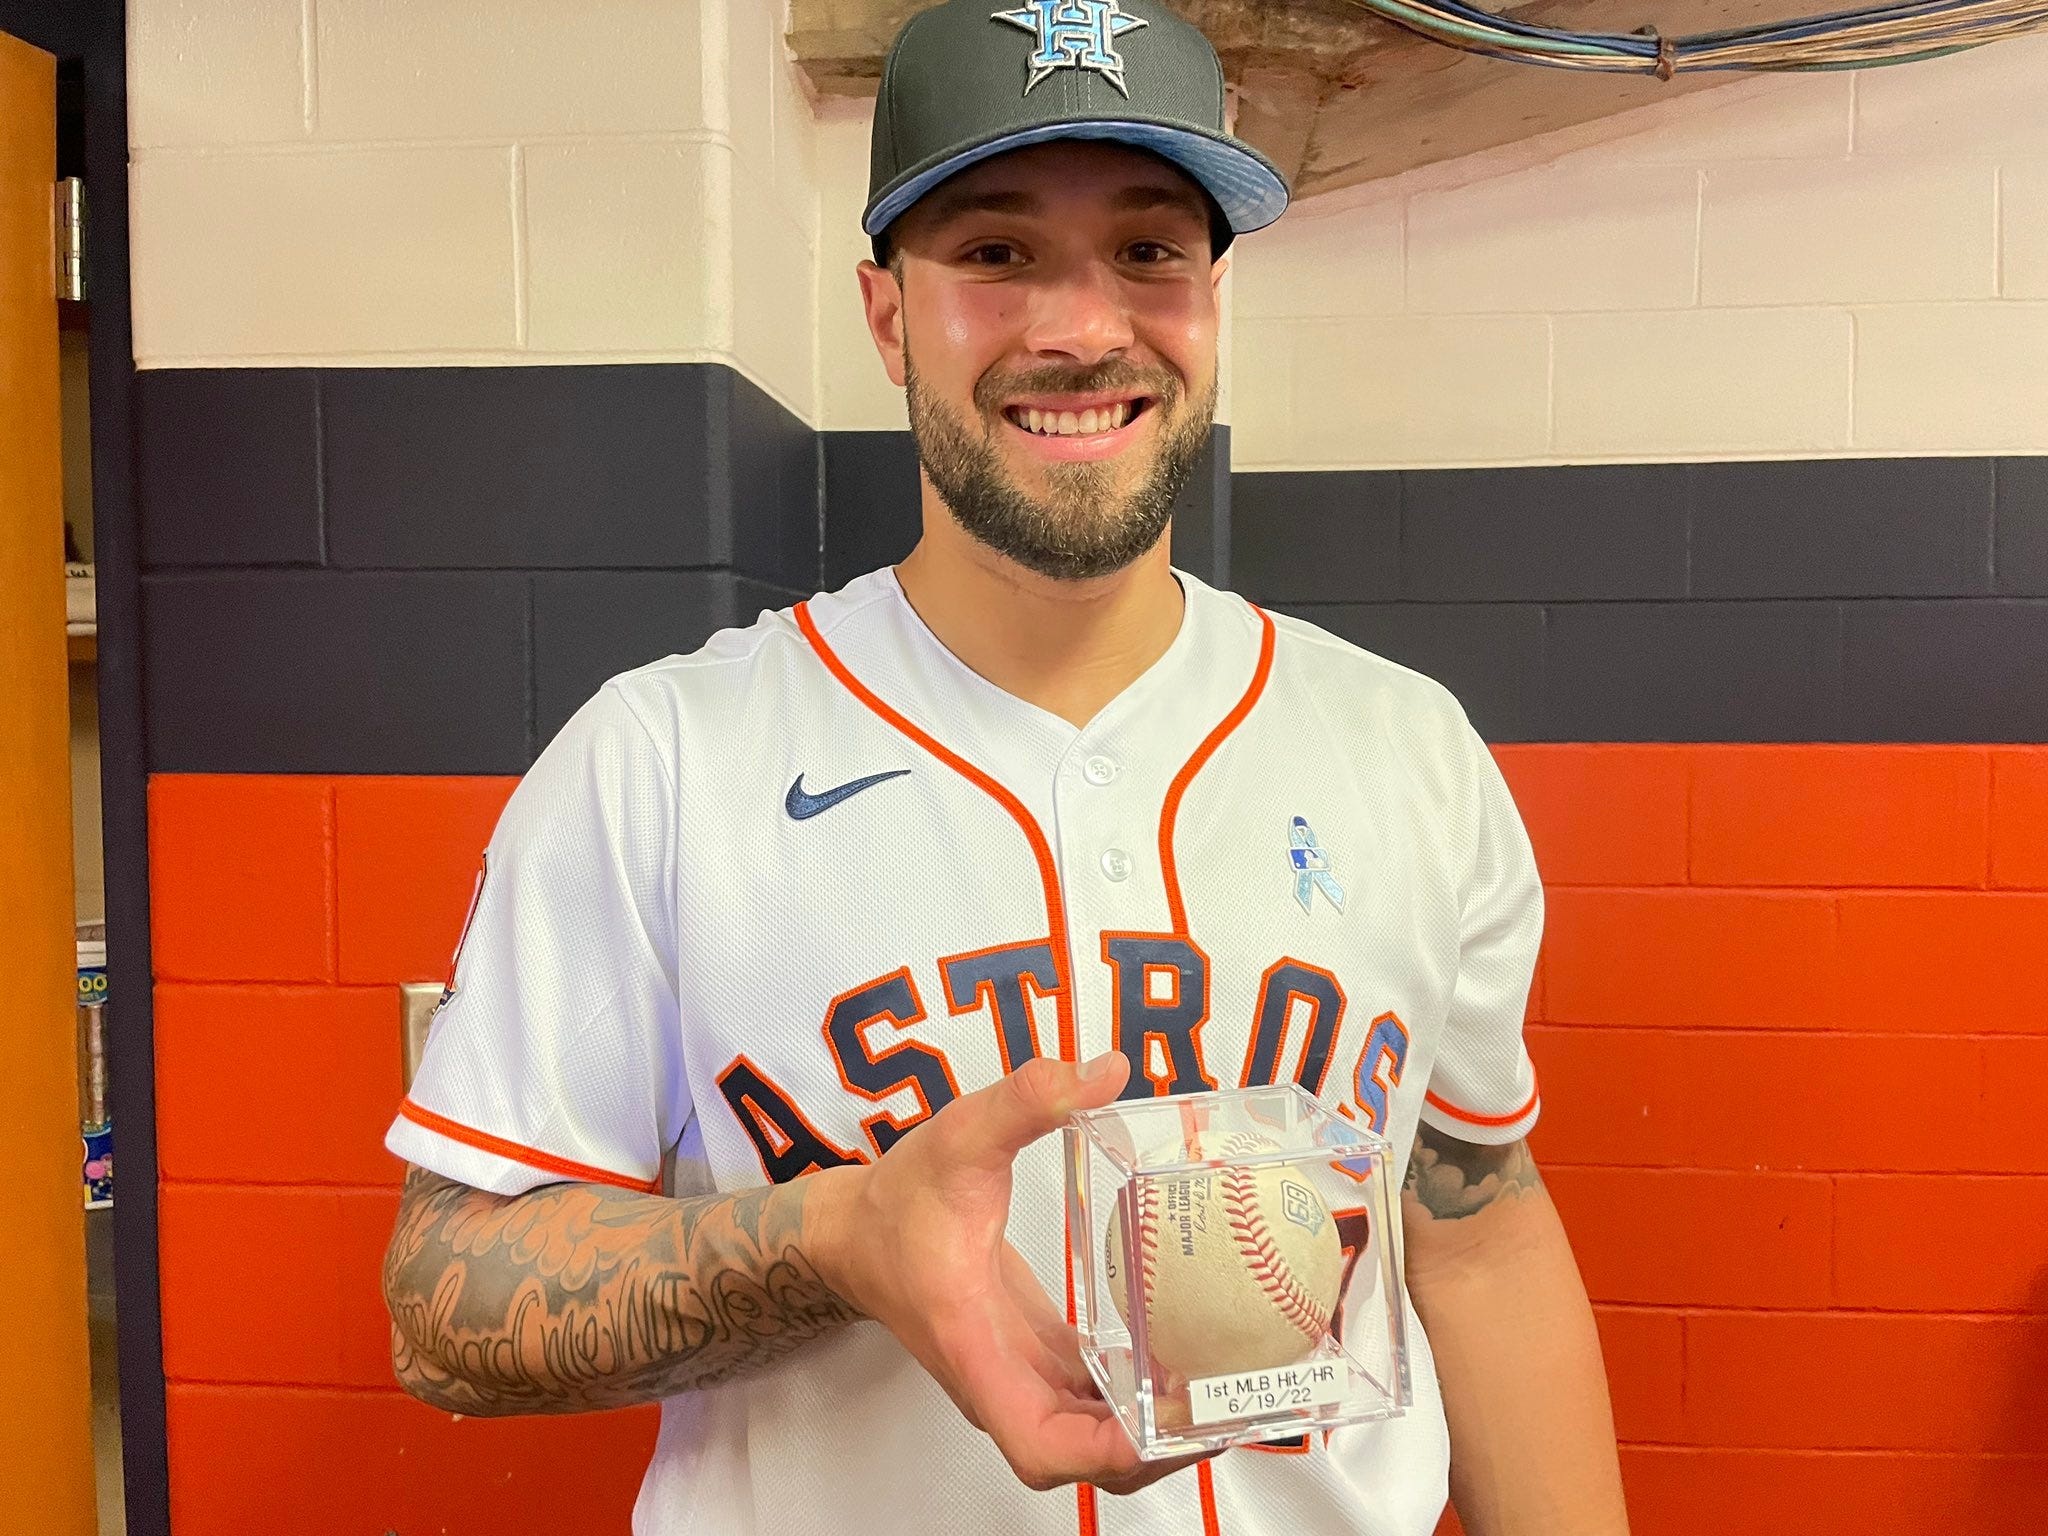 Manvel man tattoos Astros players' signatures on his arm